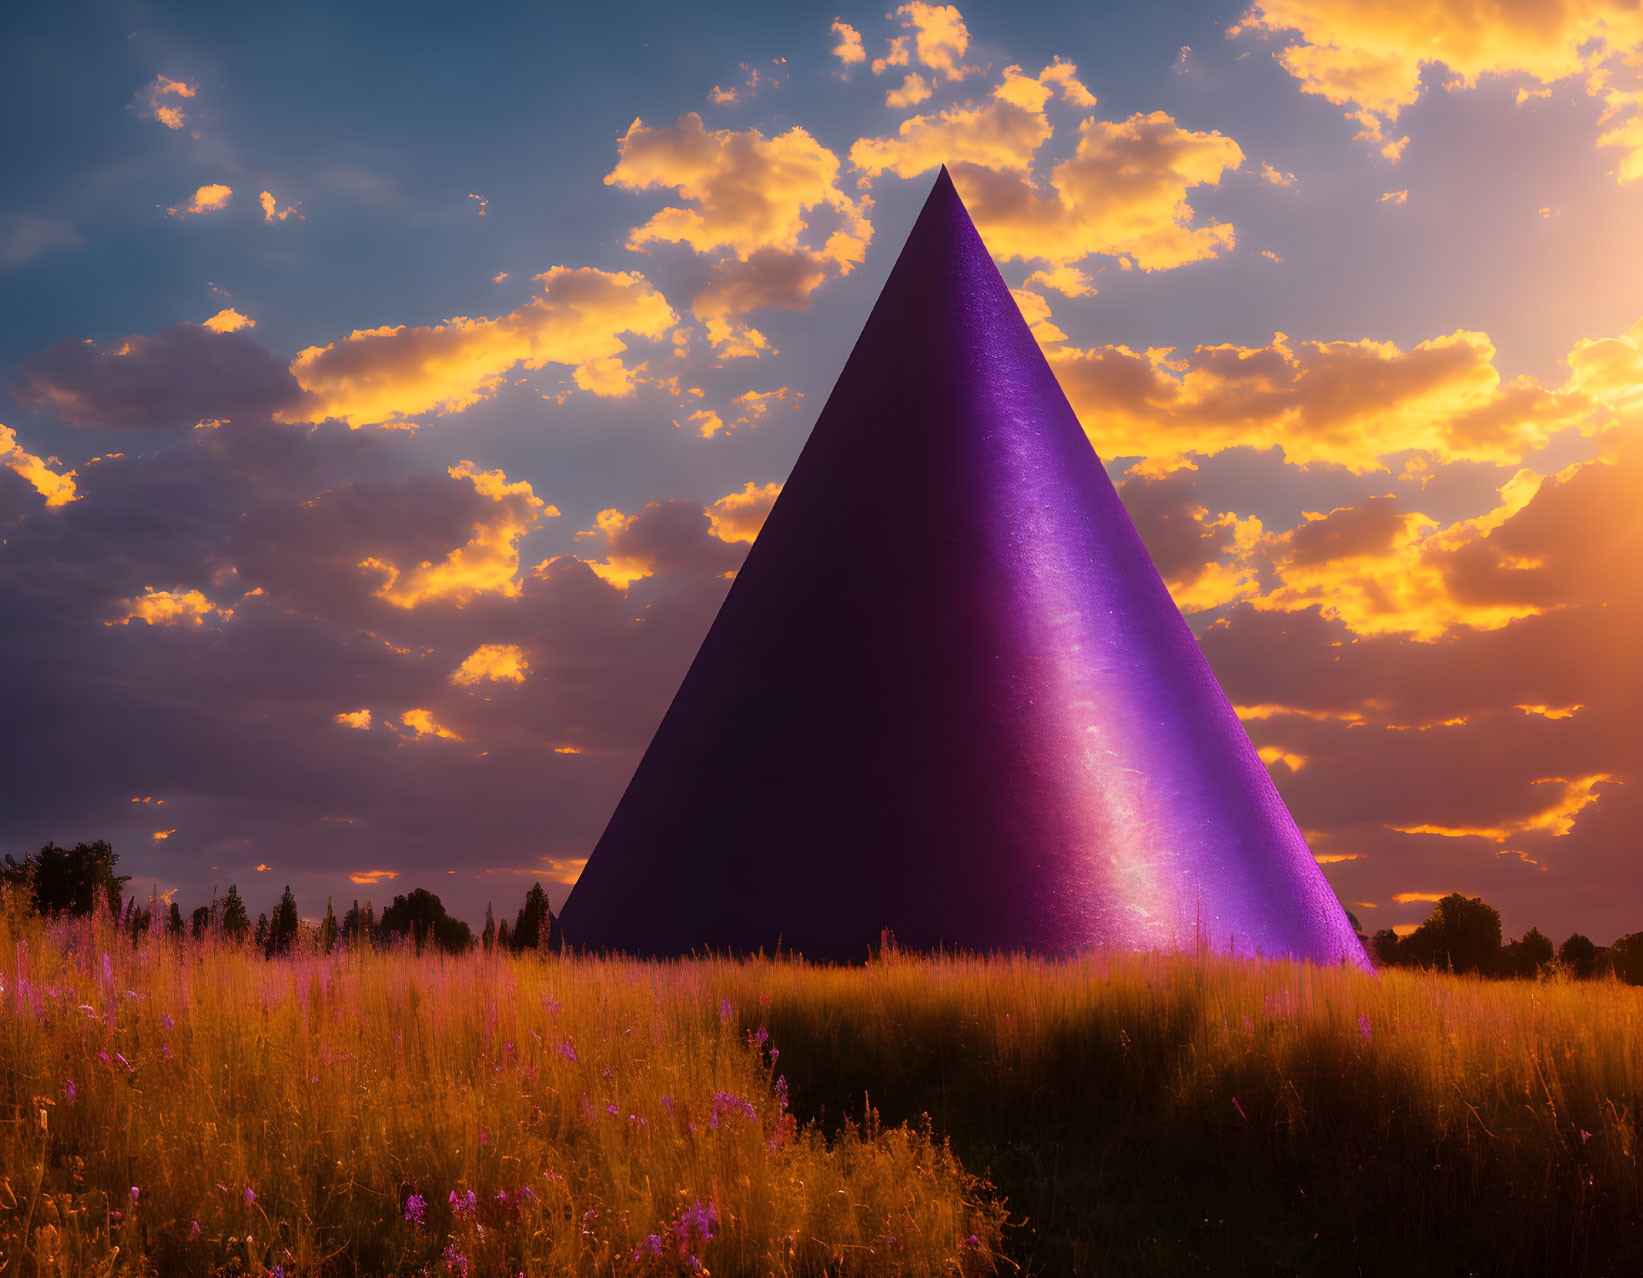 Purple Pyramid in Wildflower Field at Sunset with Dramatic Sky